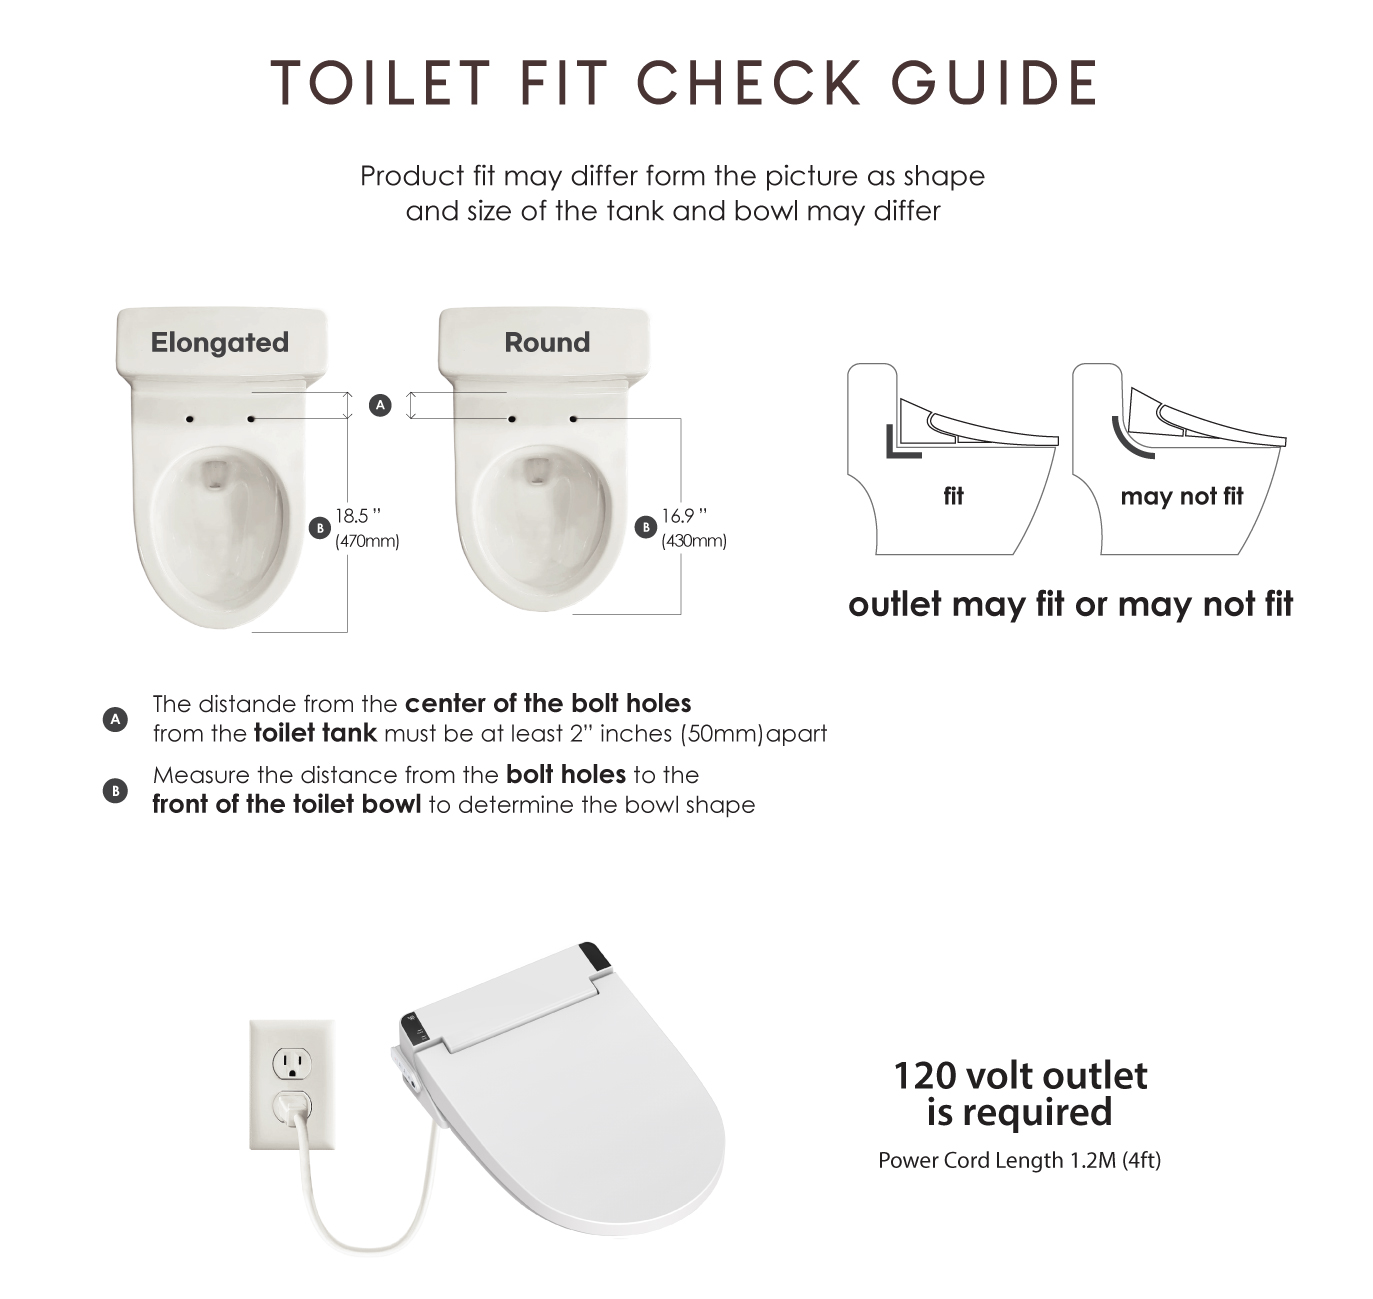 toilet fit check guide